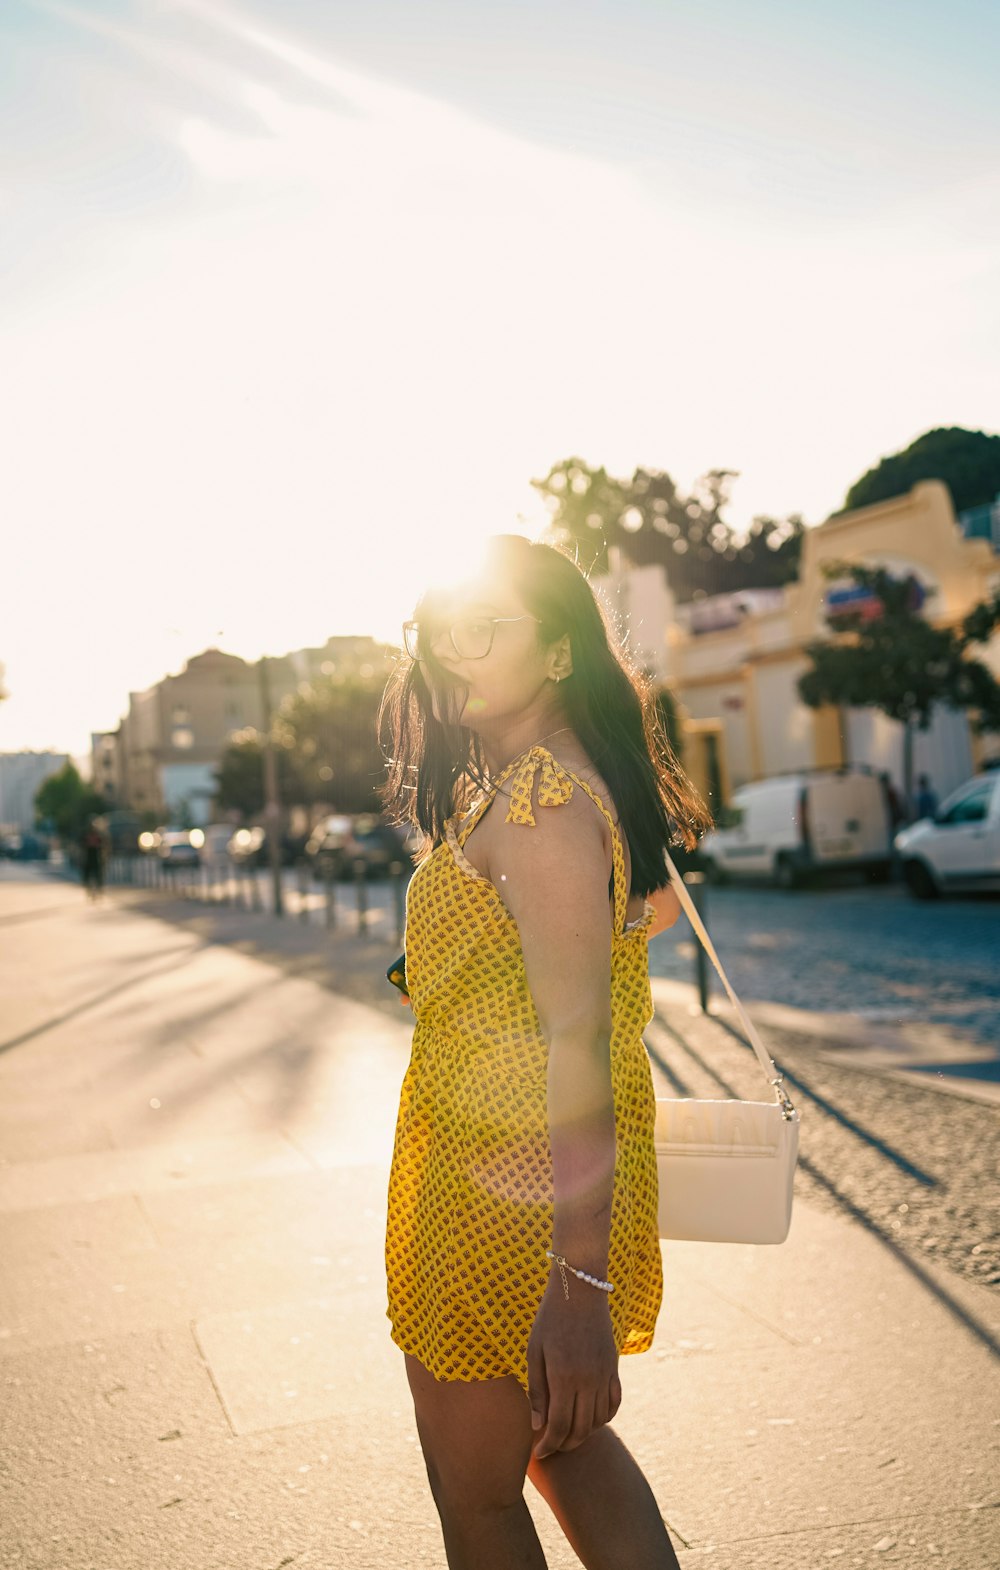 a woman in a yellow dress is walking down the street